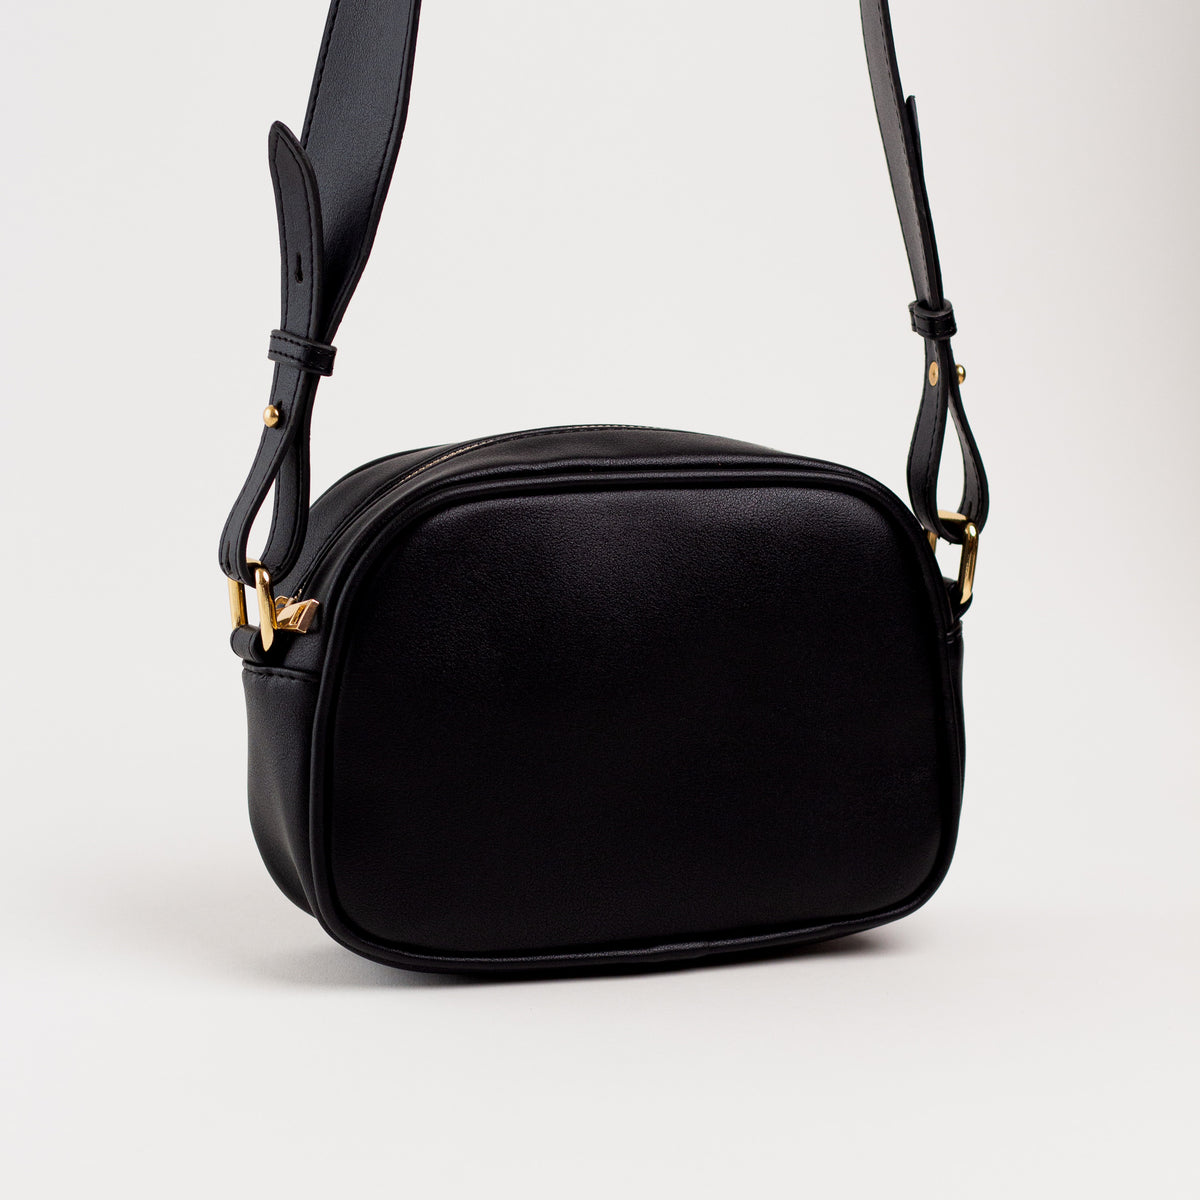 Shoulder Bags and Cross-Body Bags Collection for Women